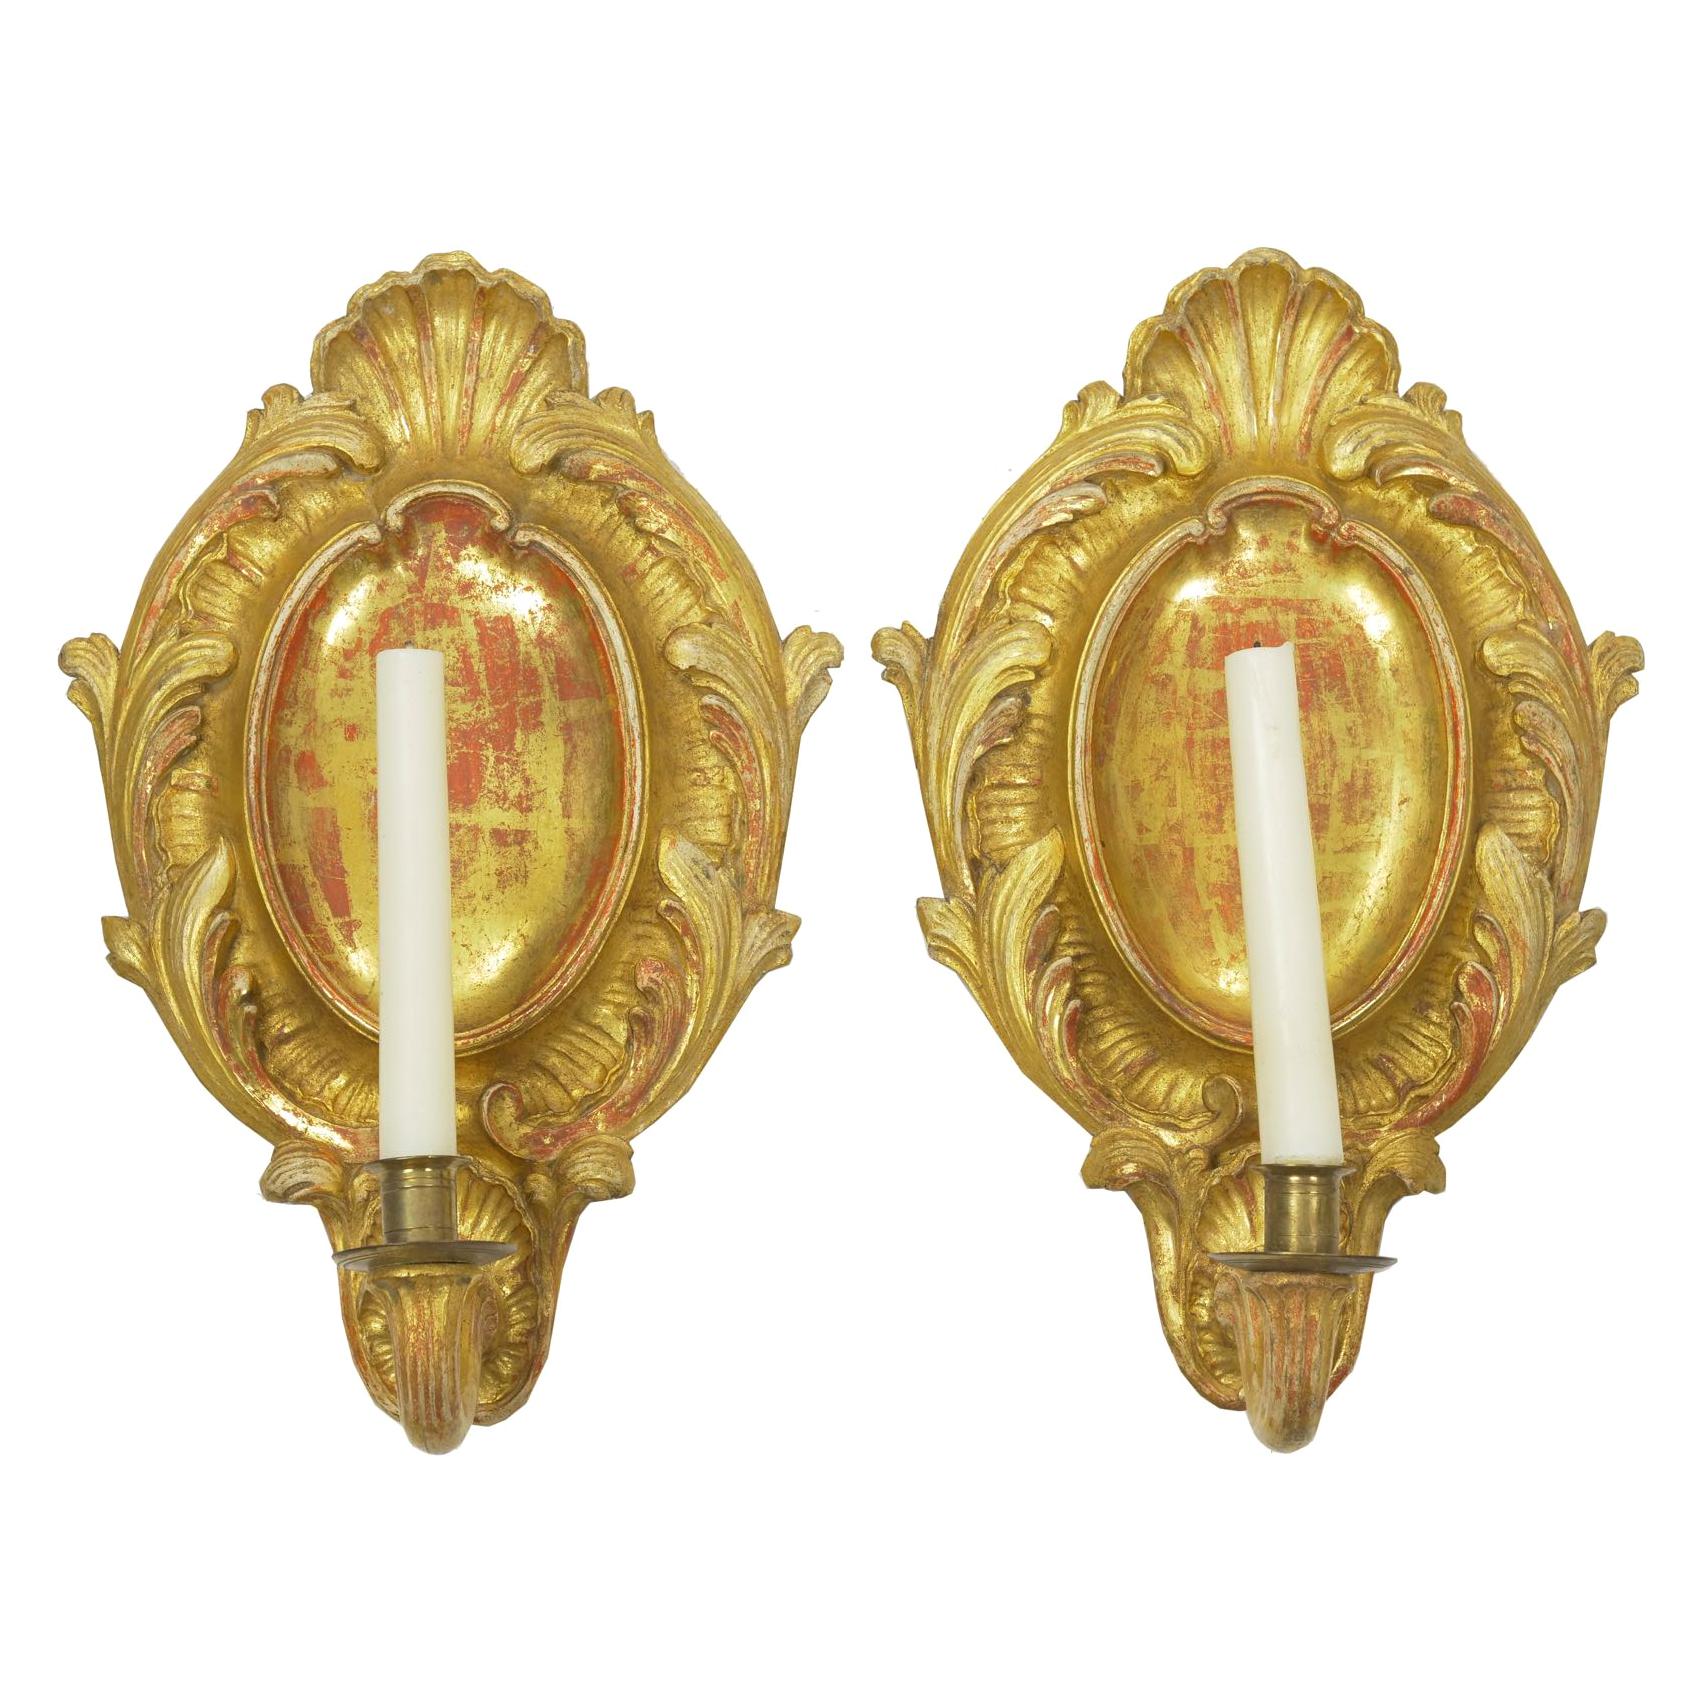 Pair of Rococo Candlestick Wall Sconces in Carved Giltwood